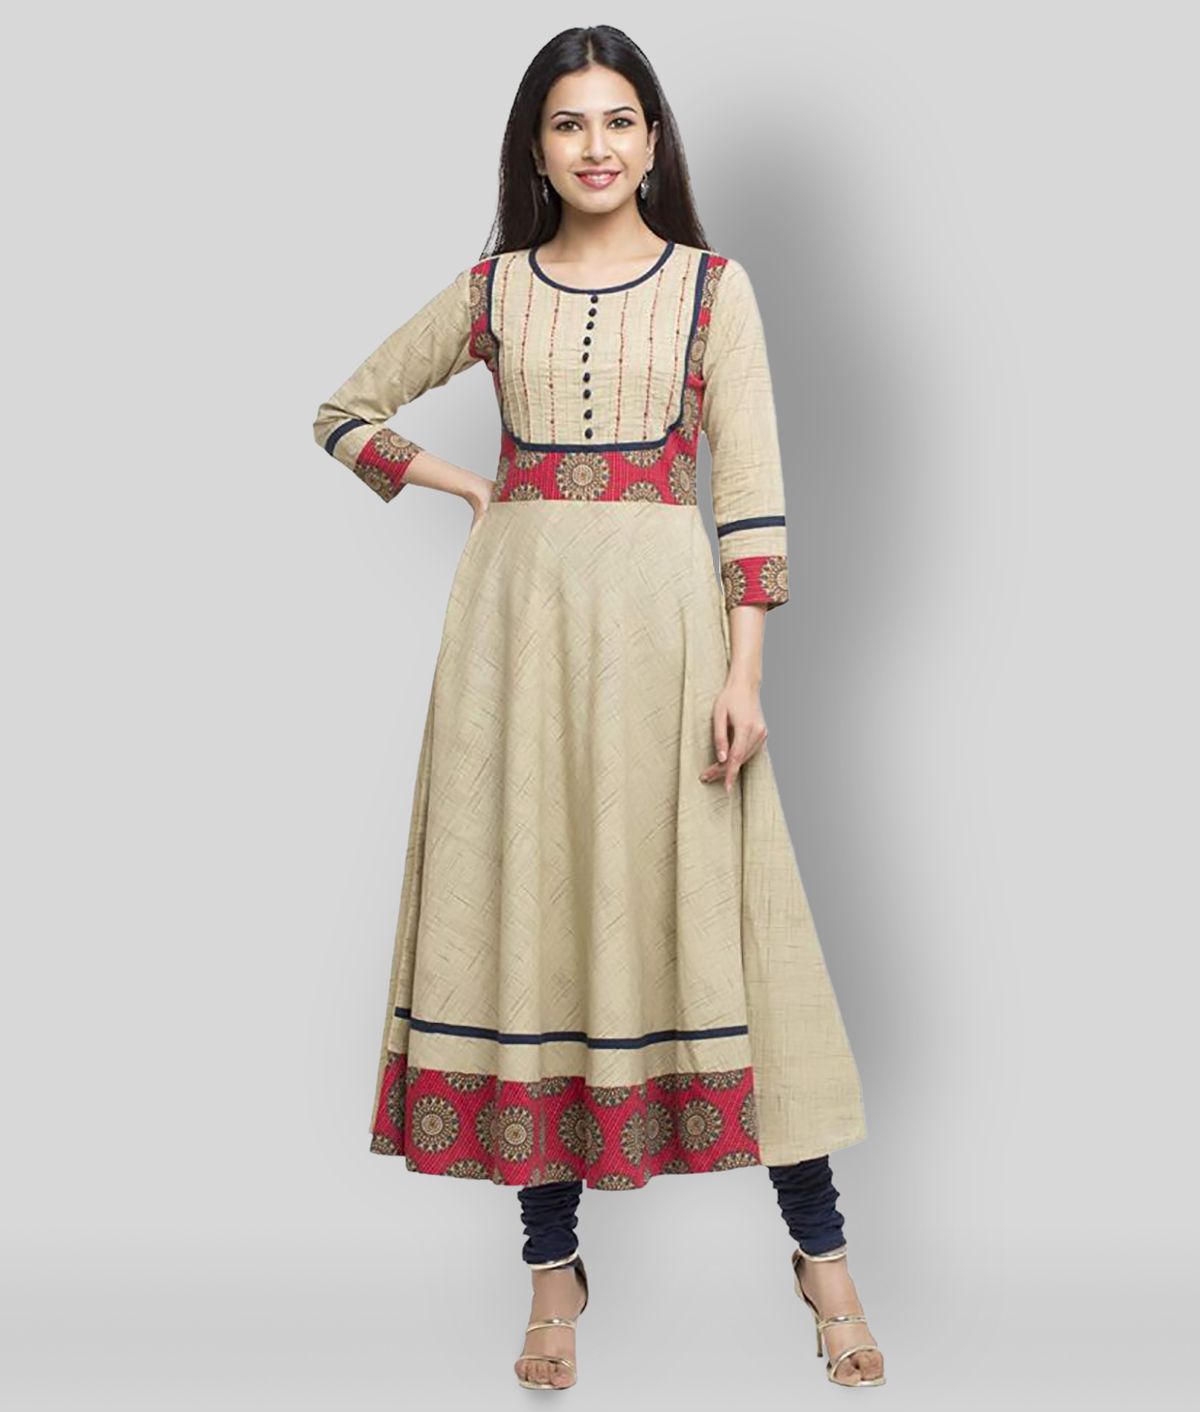 1 Stop Fashion  Multicolor Crepe Womens Straight Kurti  Pack of 6    Buy 1 Stop Fashion  Multicolor Crepe Womens Straight Kurti  Pack of 6   Online at Best Prices in India on Snapdeal